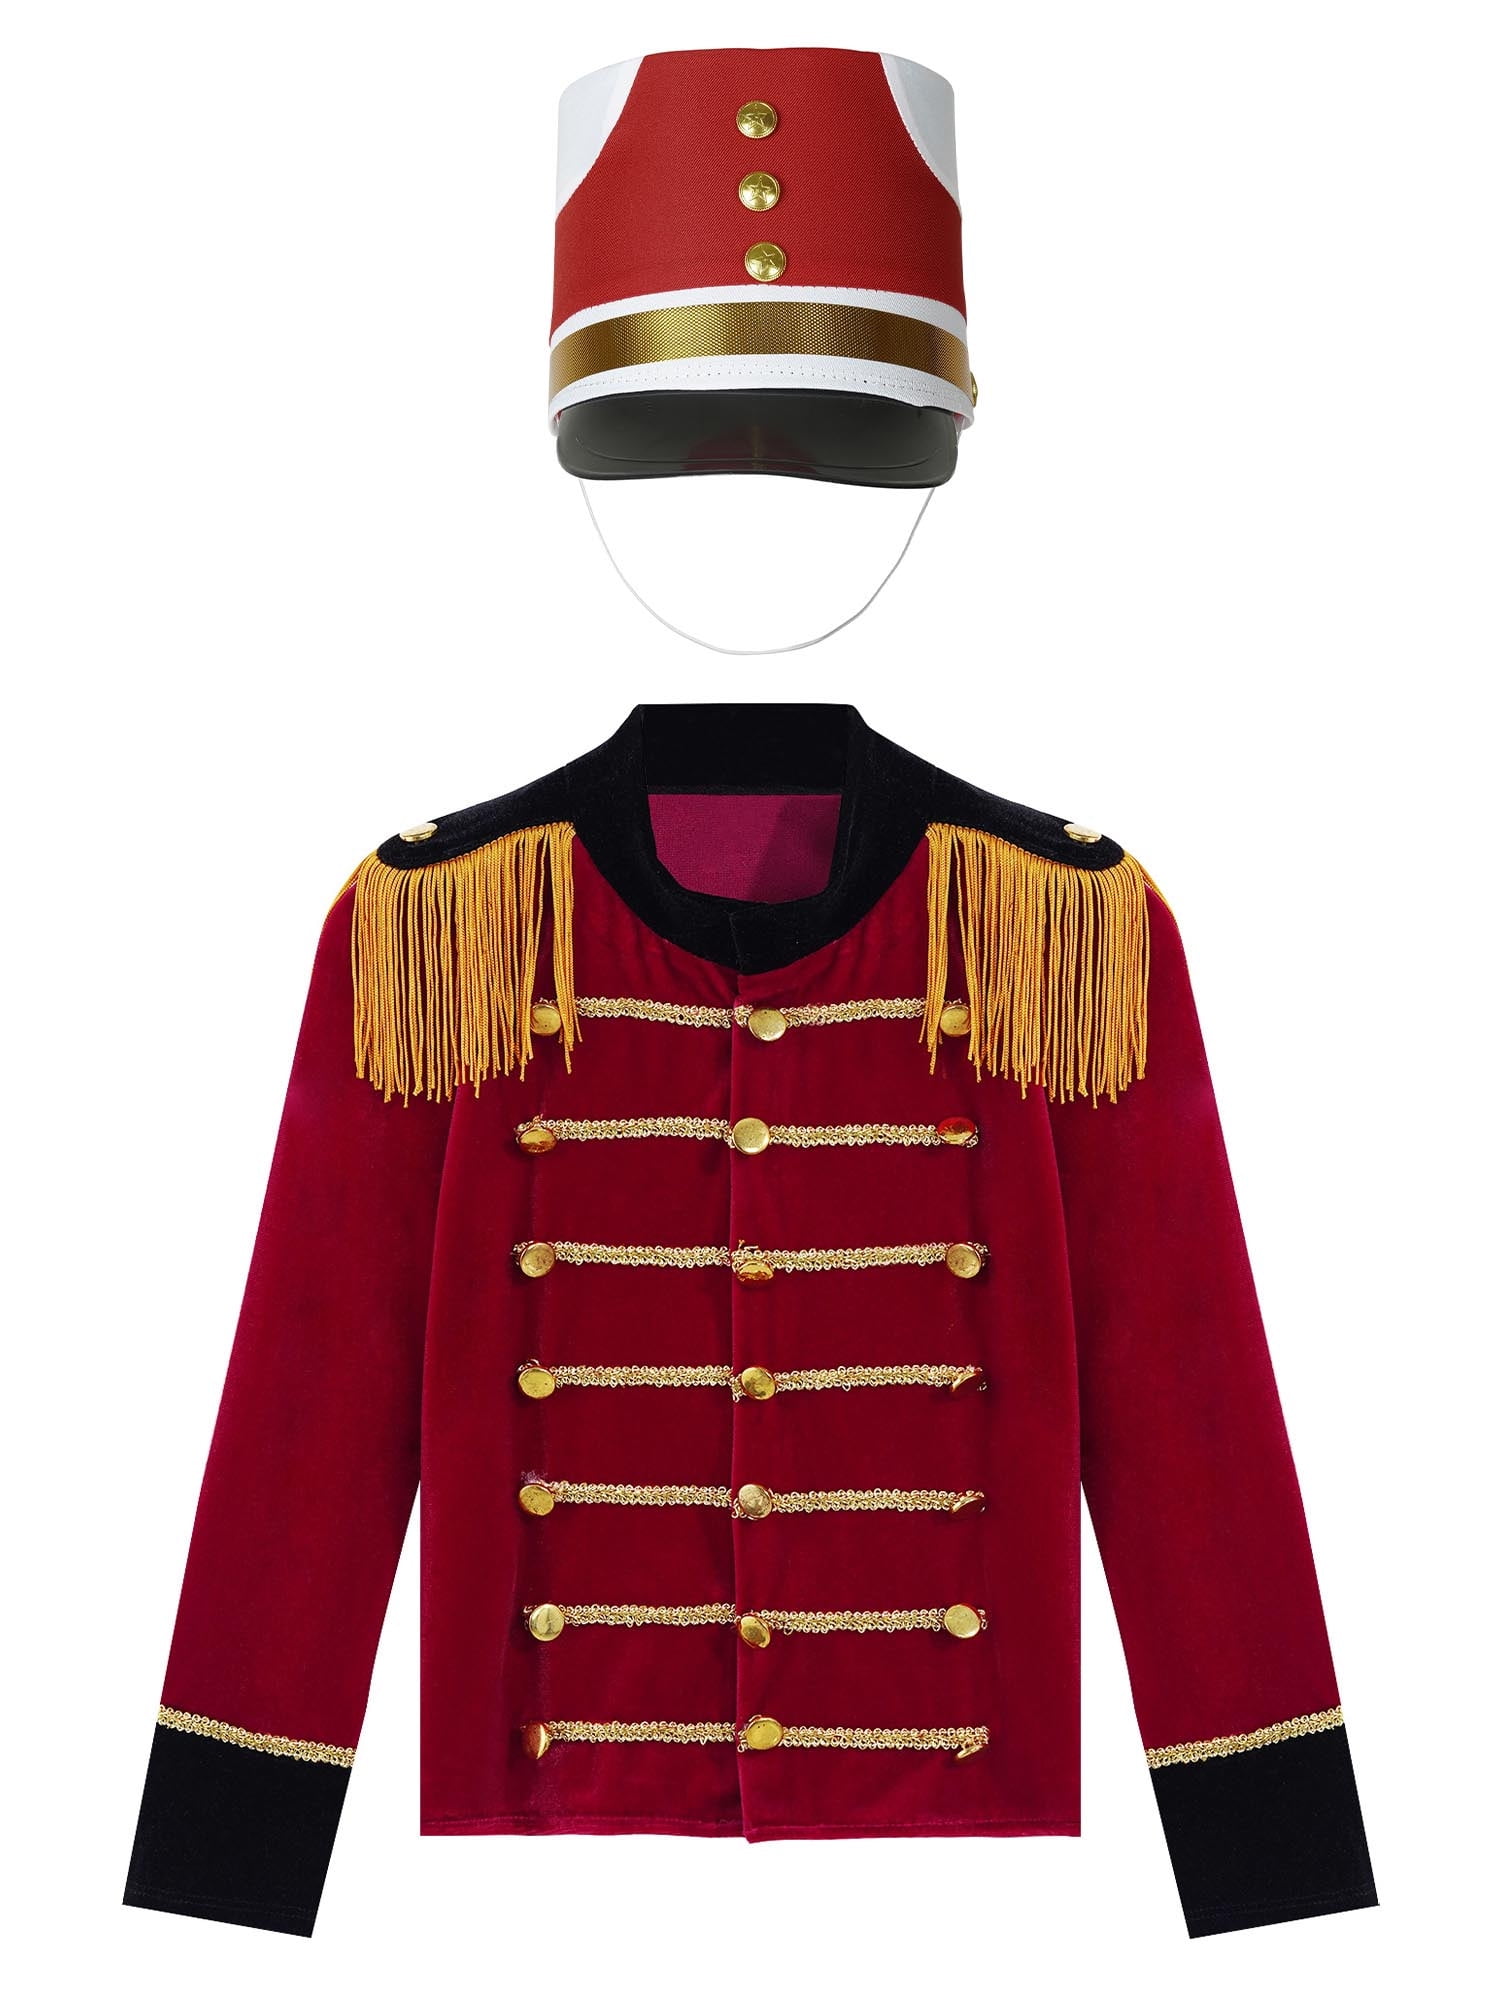  TiaoBug Kids Girls Boys Drum Major Costume Marching Band Uniform  Tassel Red Circus Ringmaster Jacket Halloween Costumes 2 Pieces 4 Years :  Clothing, Shoes & Jewelry